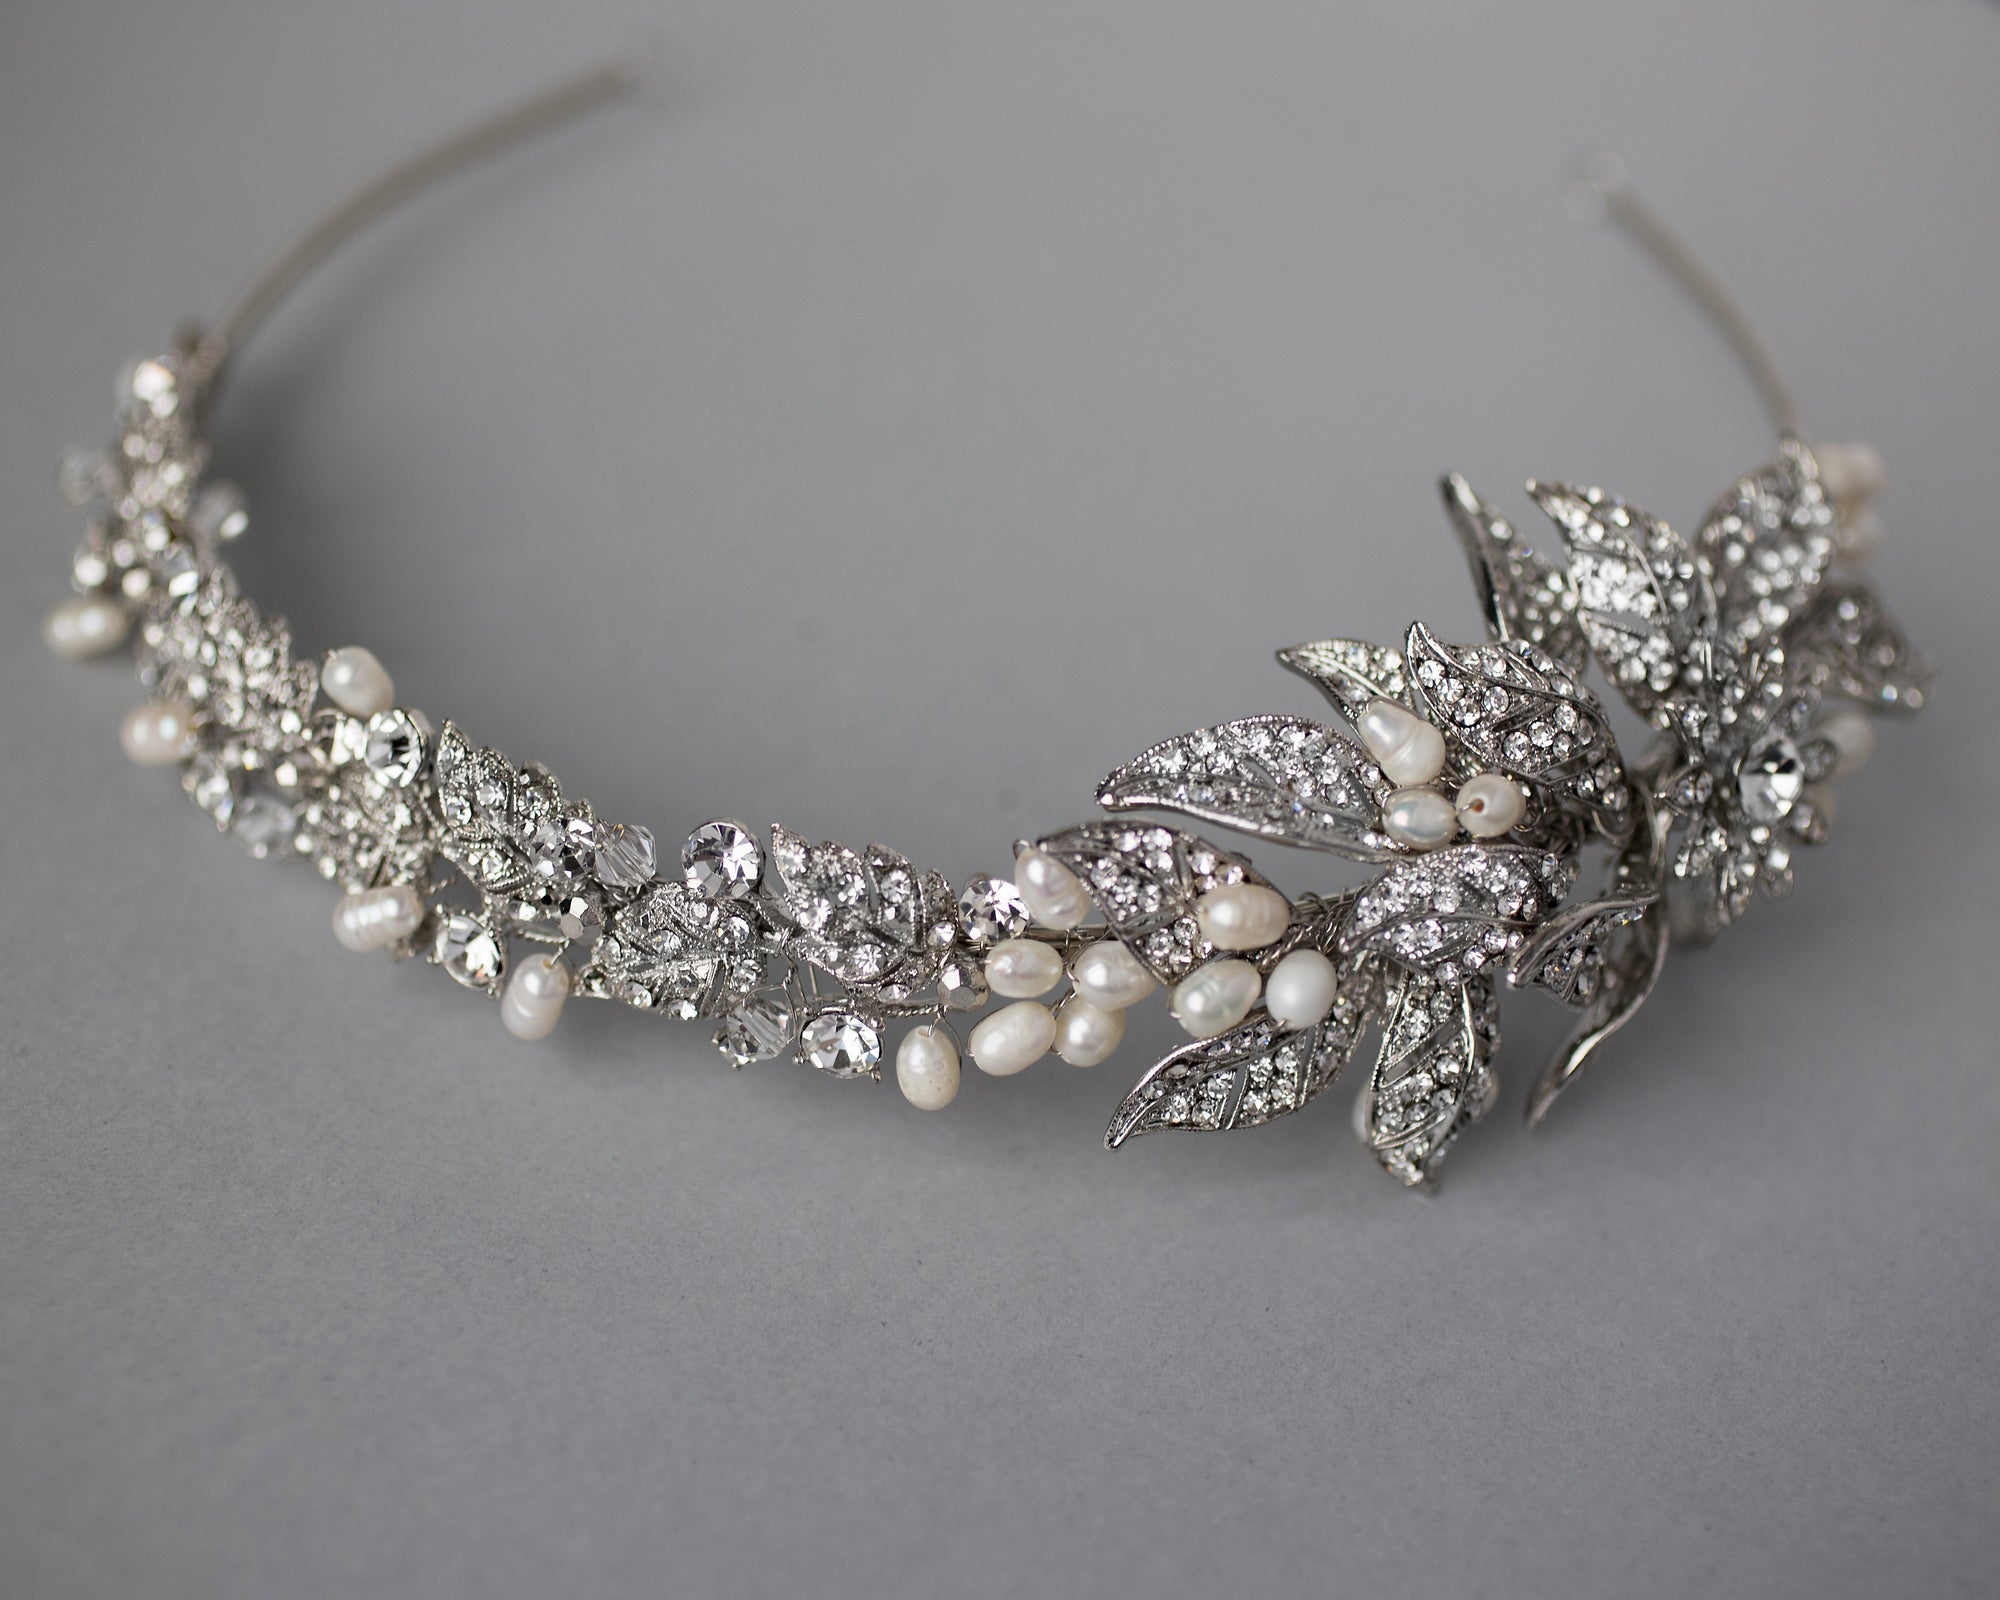 Antique Silver and Pearls Side Accent Headband - Cassandra Lynne